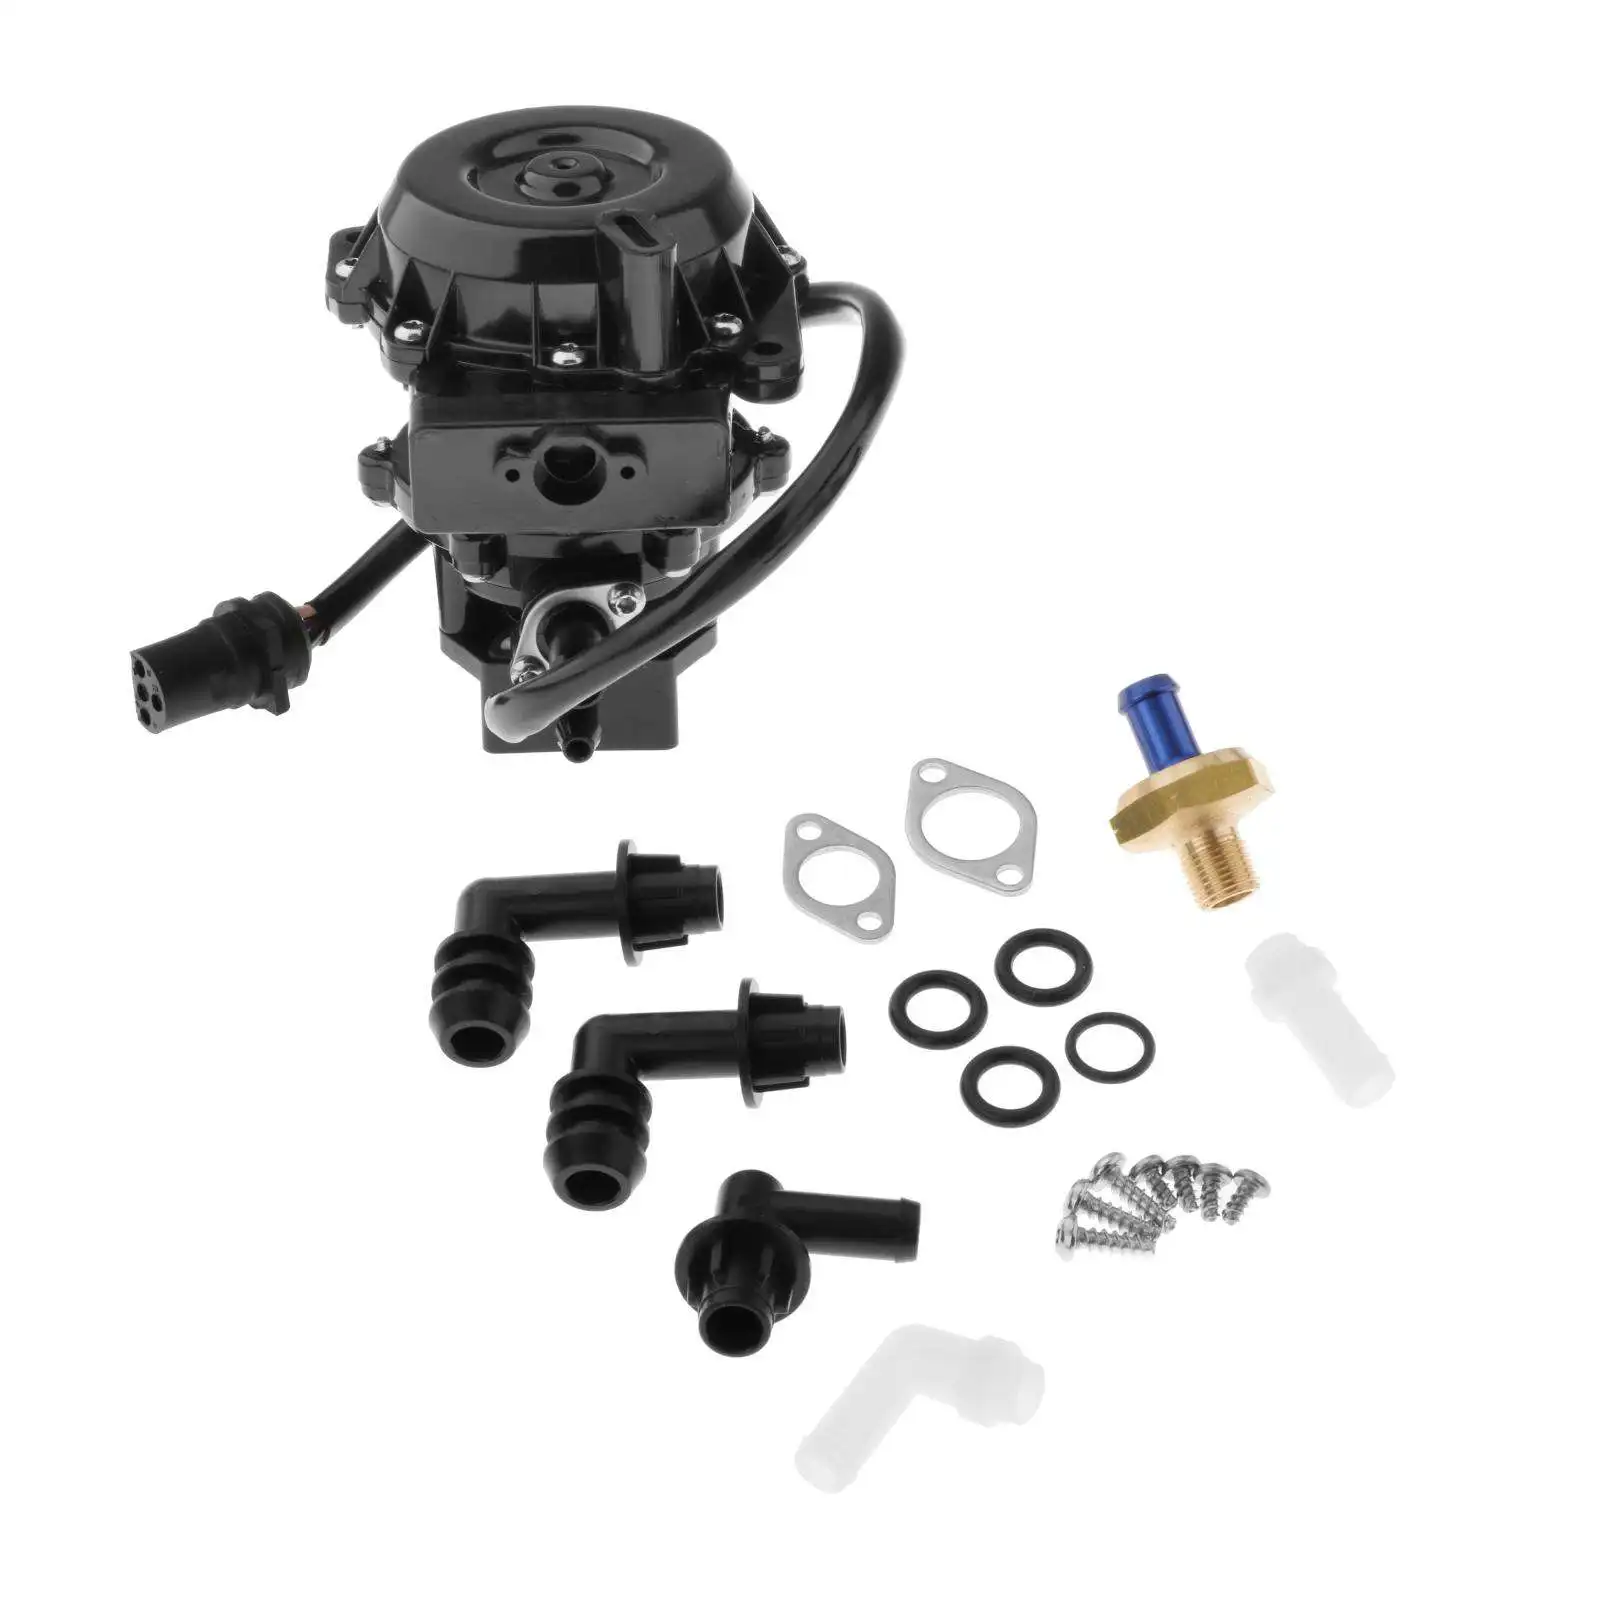 Oil Injection Fuel VRO Pump Kit Replaces fits for Evinrude 5007420 175109